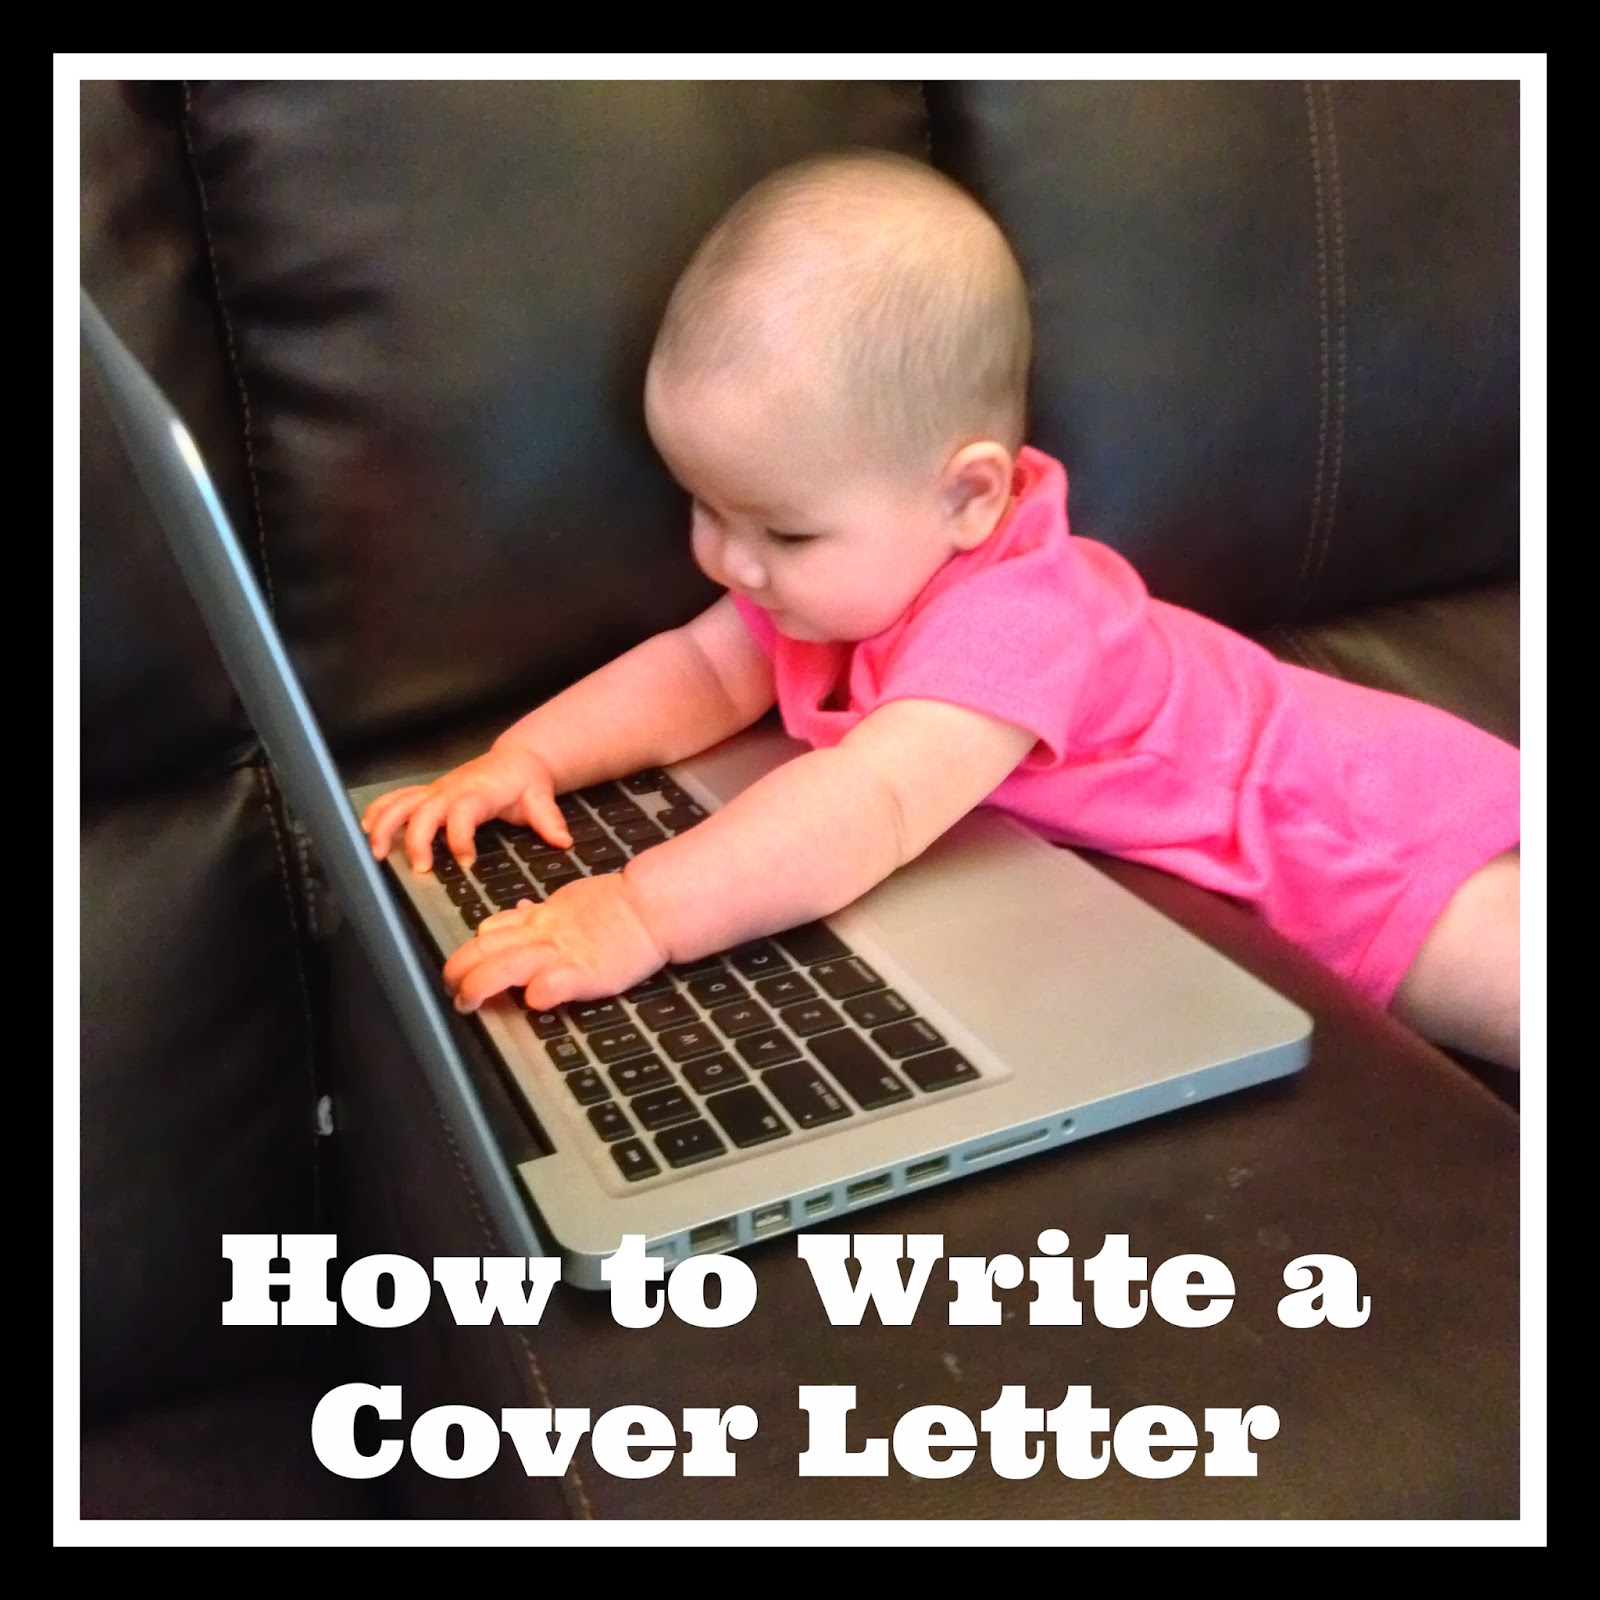 san-diego-hr-mom-how-to-write-a-cover-letter